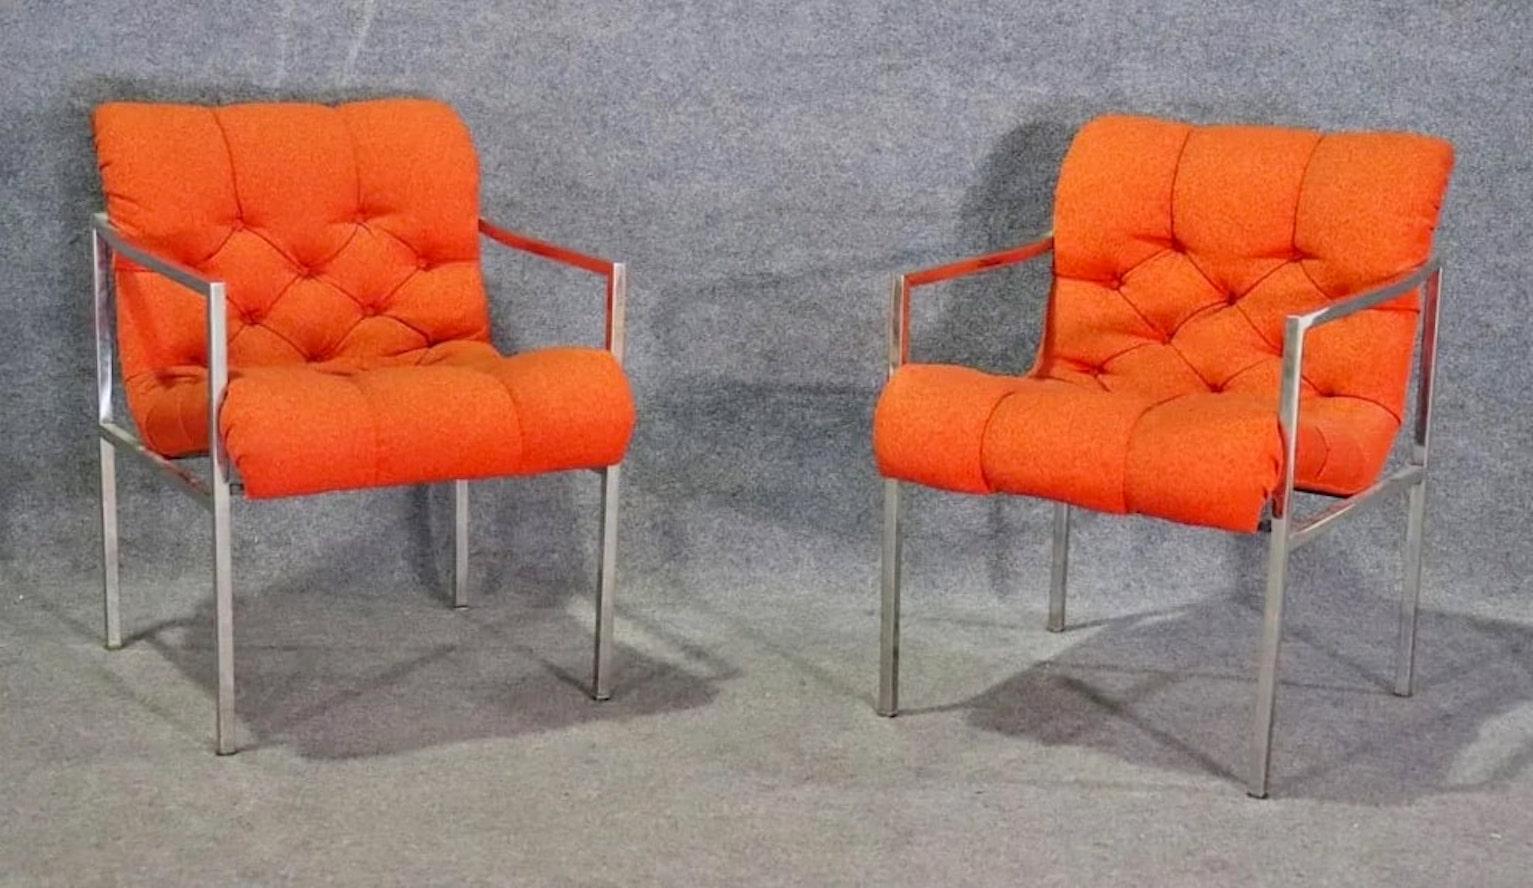 Pair of vintage modern arm chairs with polished chrome frame holding a floating scoop seat. Tufted fabric seat with great curved shape.
Please confirm location NY or NJ